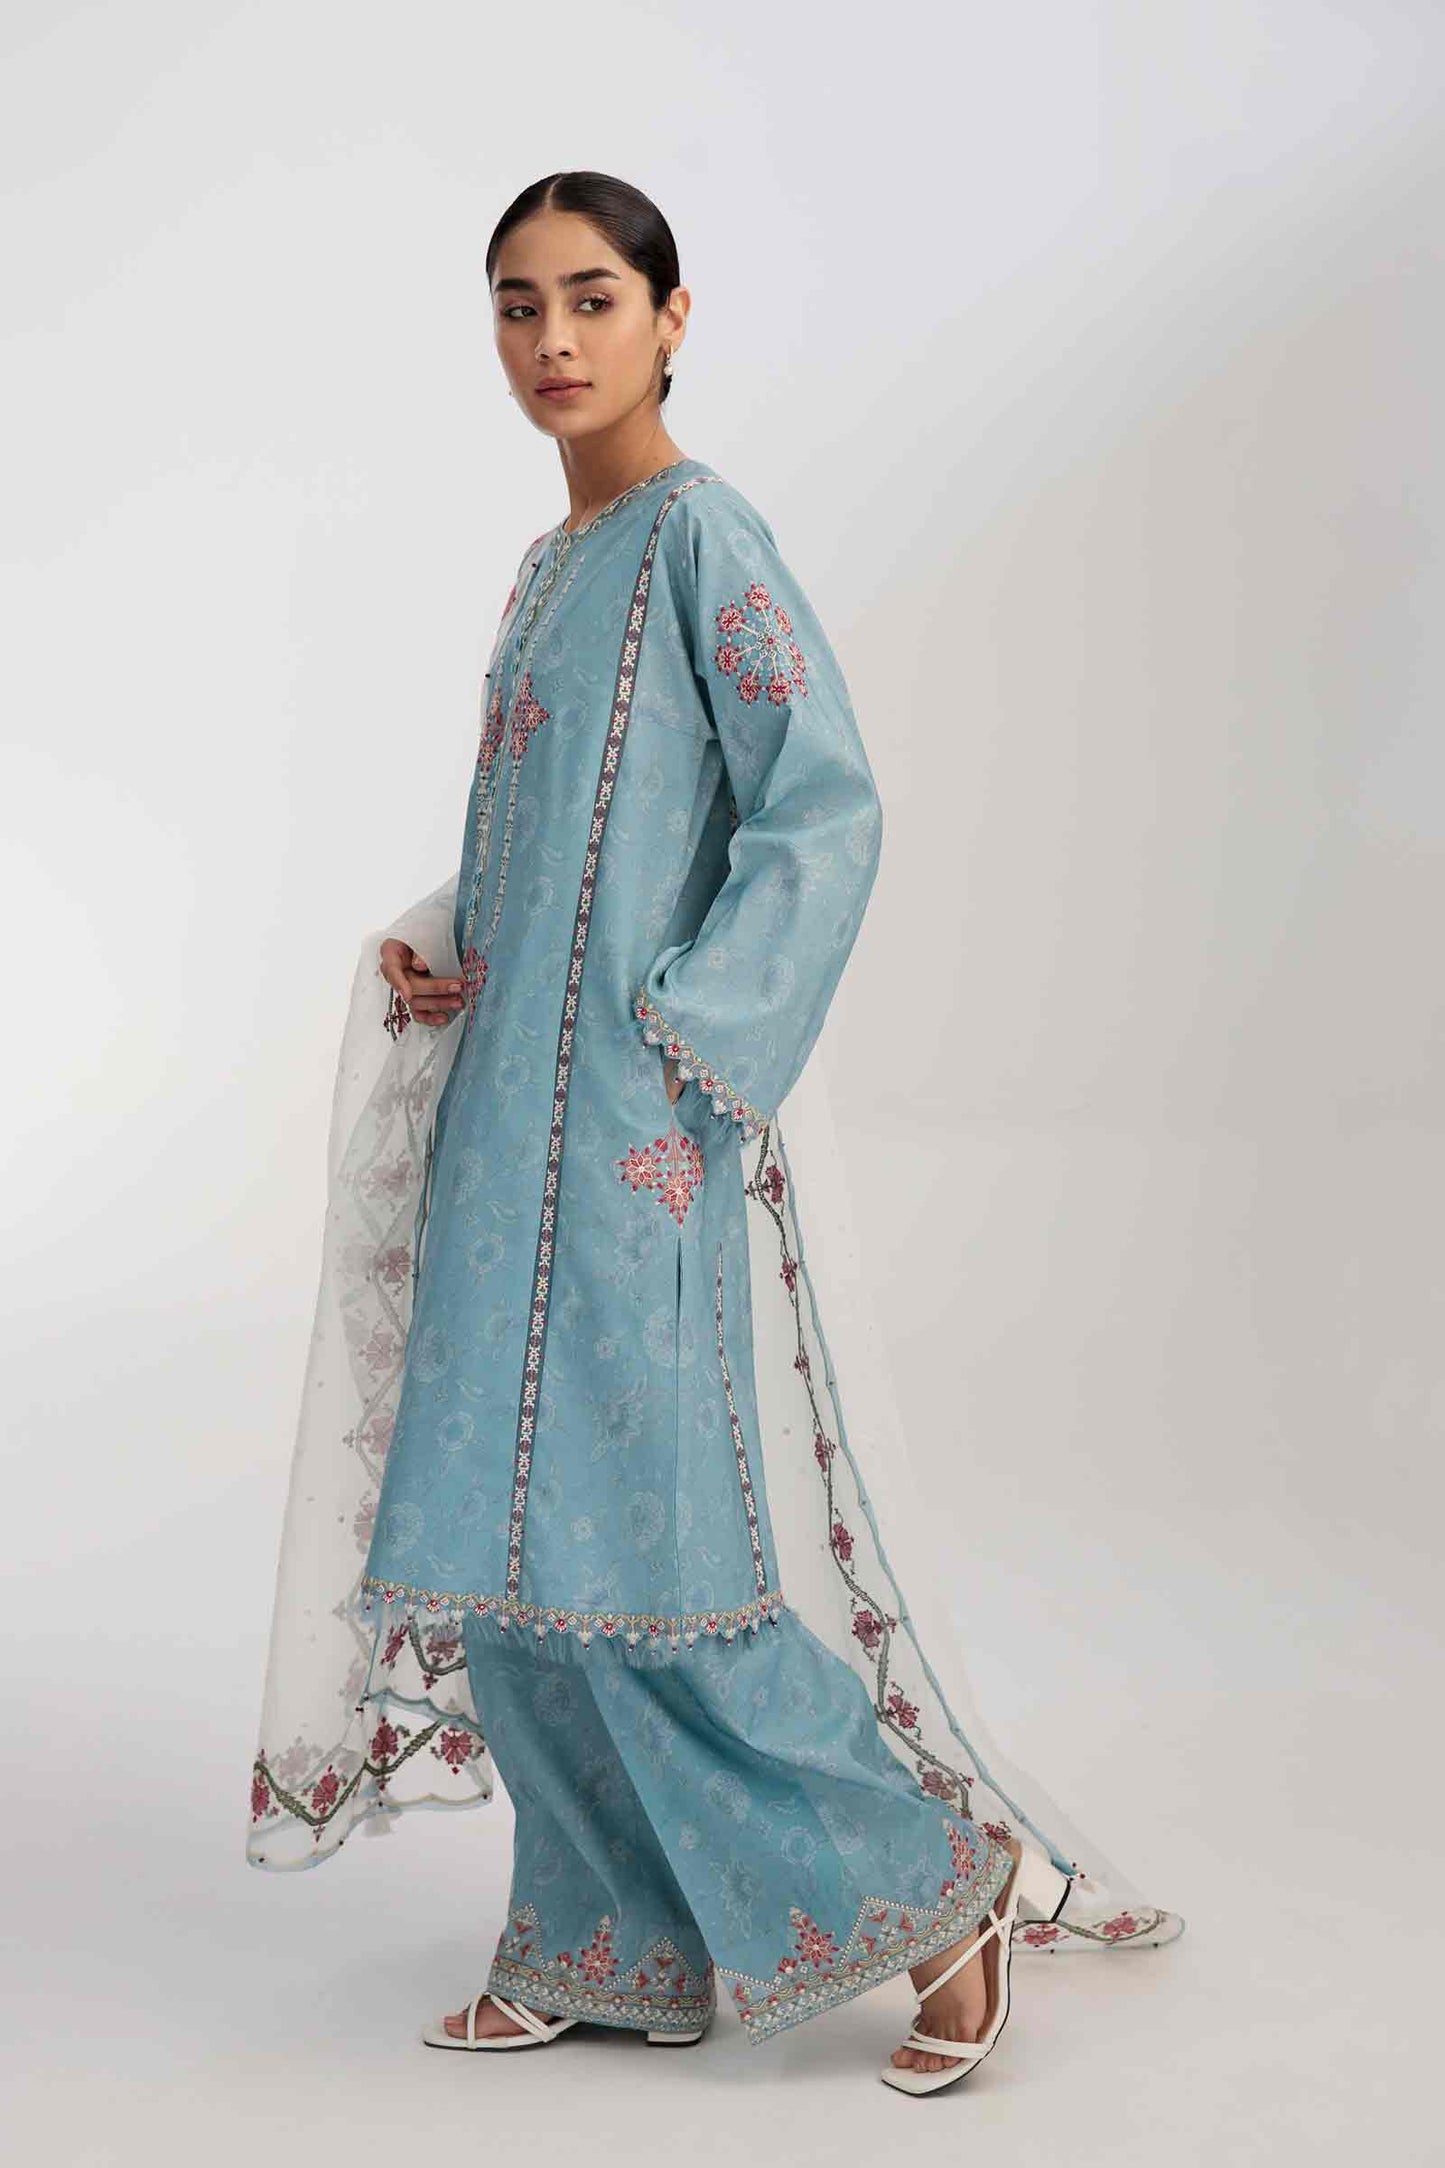 Coco by Zara Shahjahan Embroidered Lawn Suits Unstitched 3 Piece Z23-6b